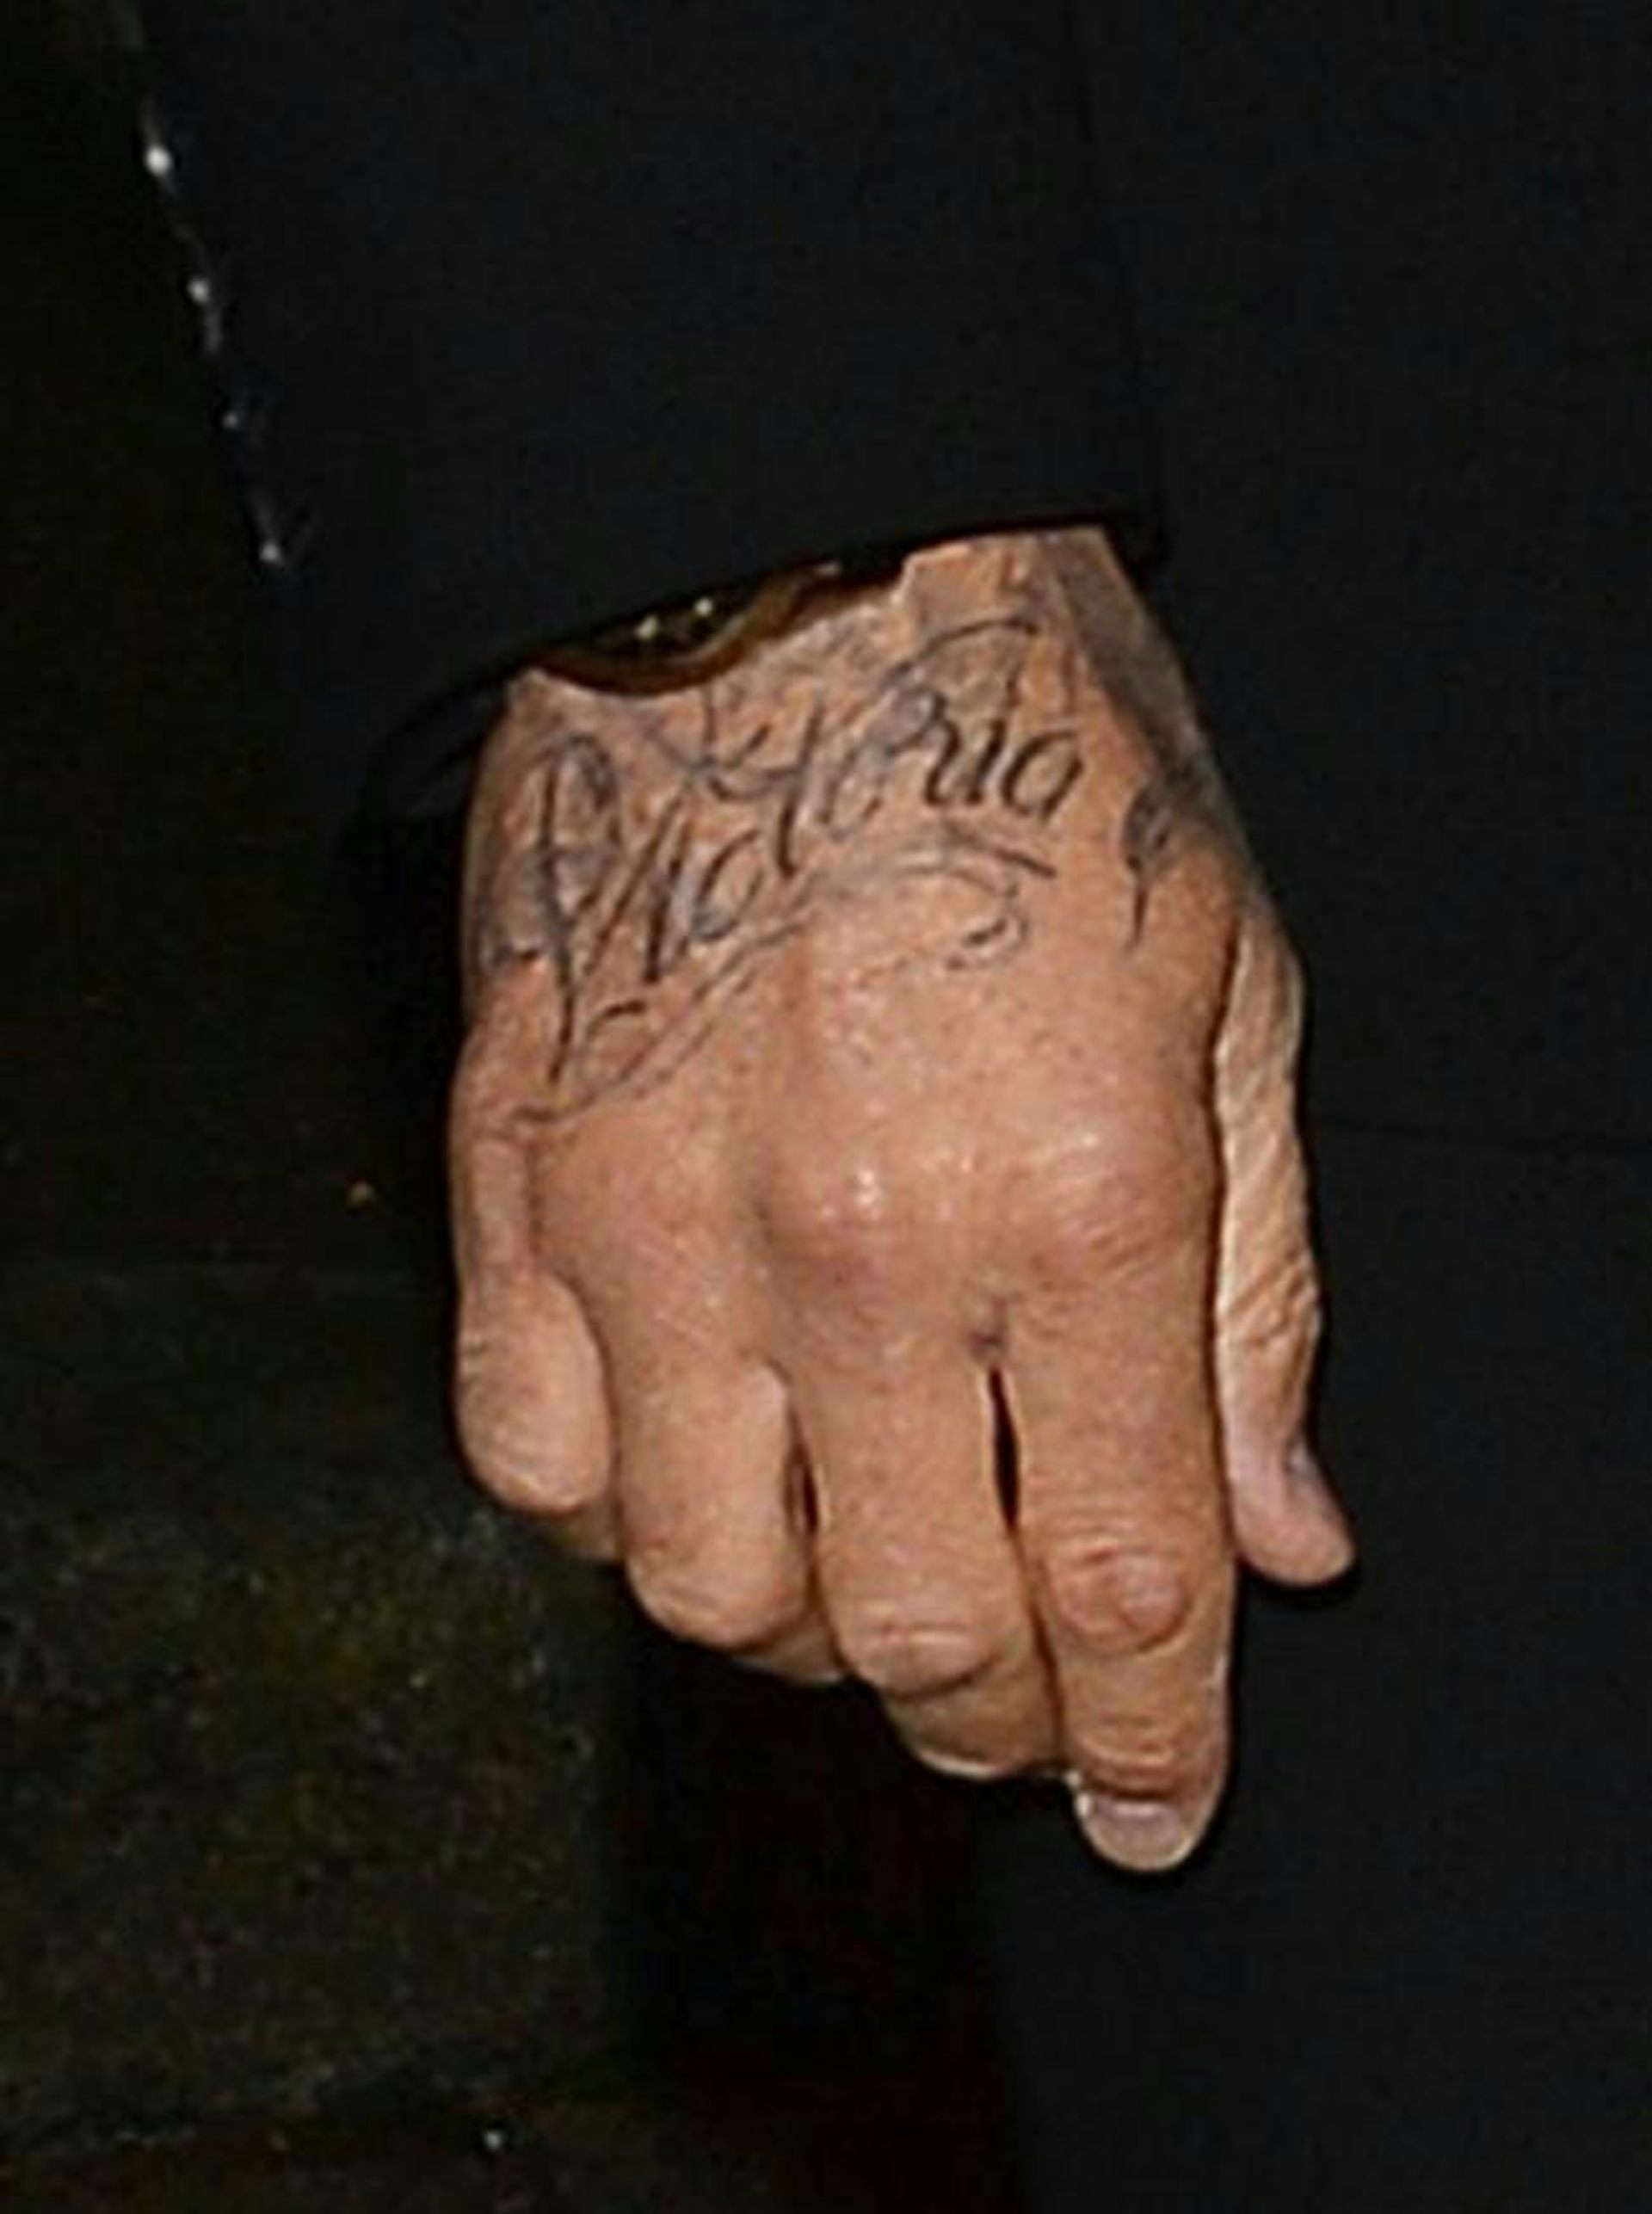 Angelina Jolies tattoos and the sweet meanings behind them  HELLO